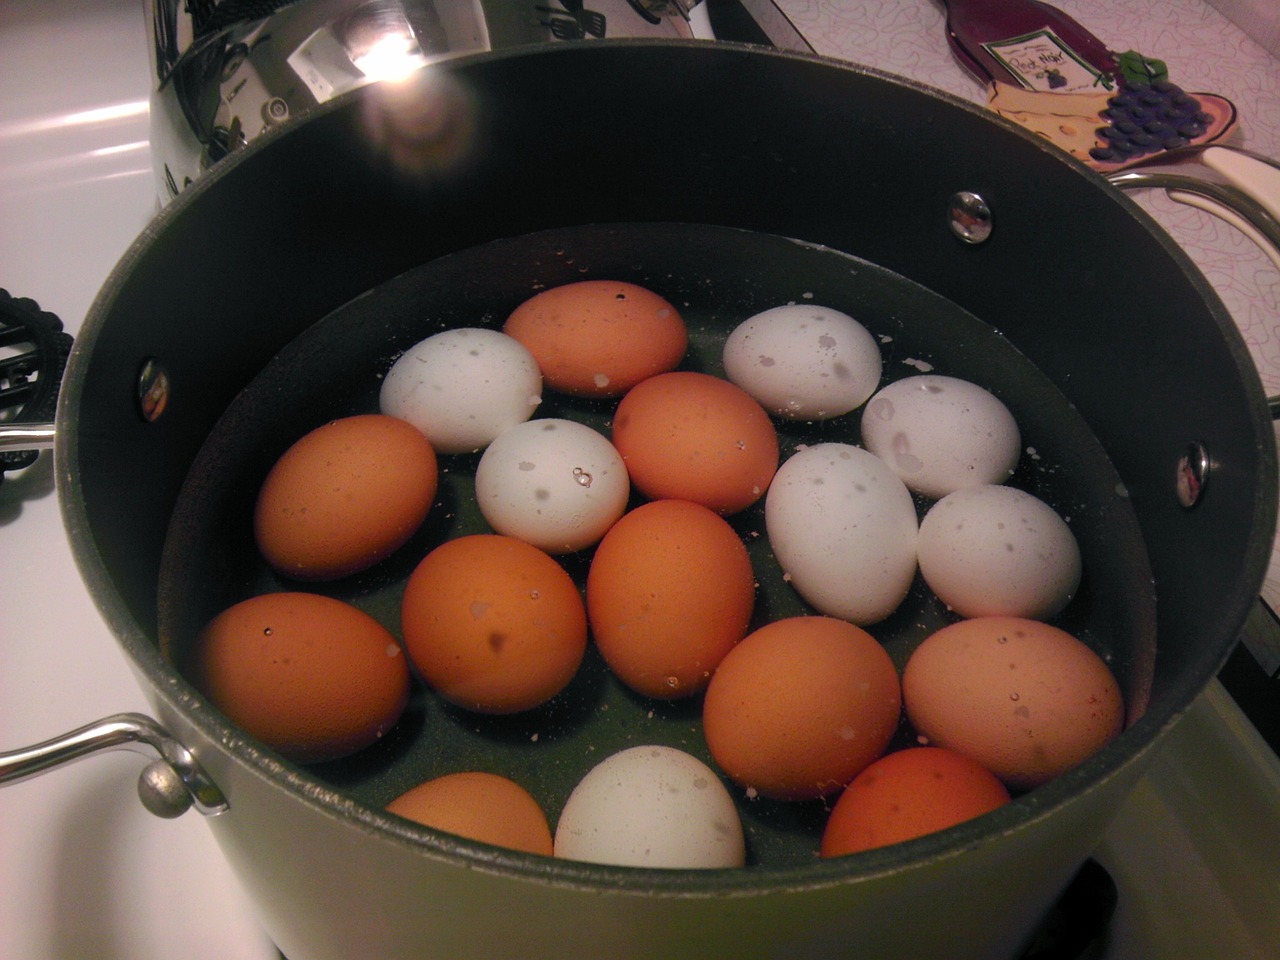 How to boil eggs